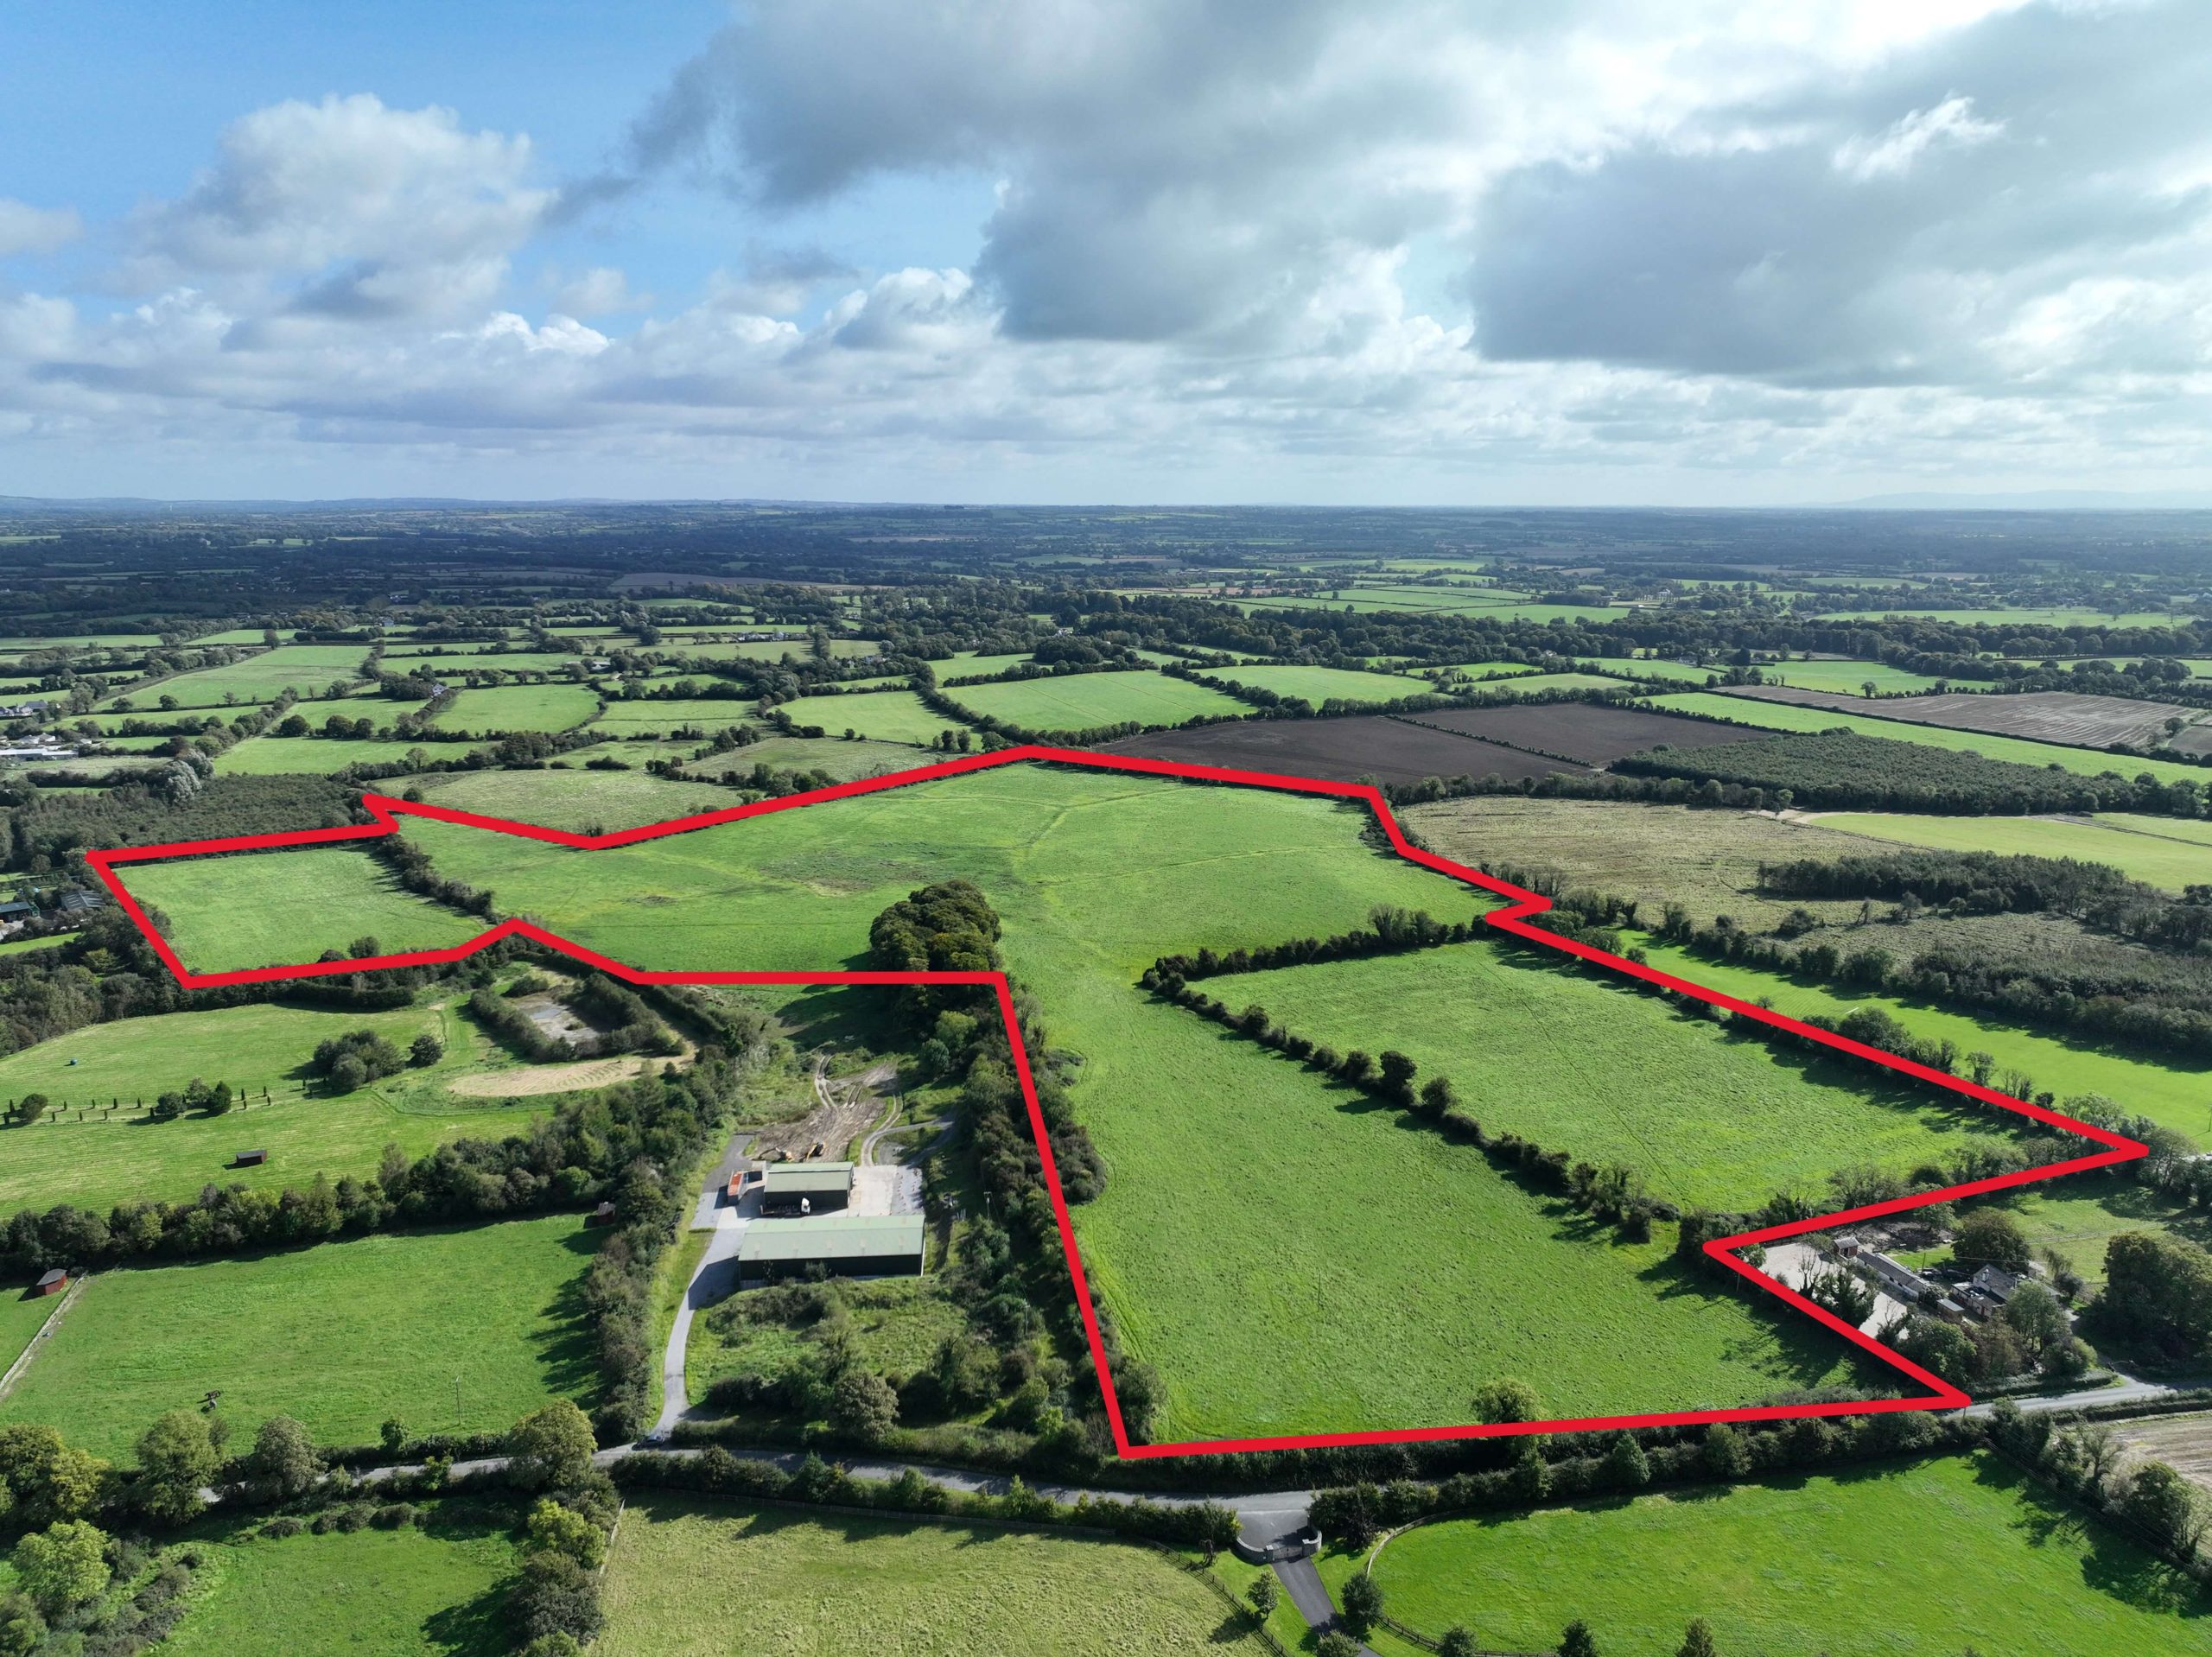 61 Acre Farm for Auction in Meath